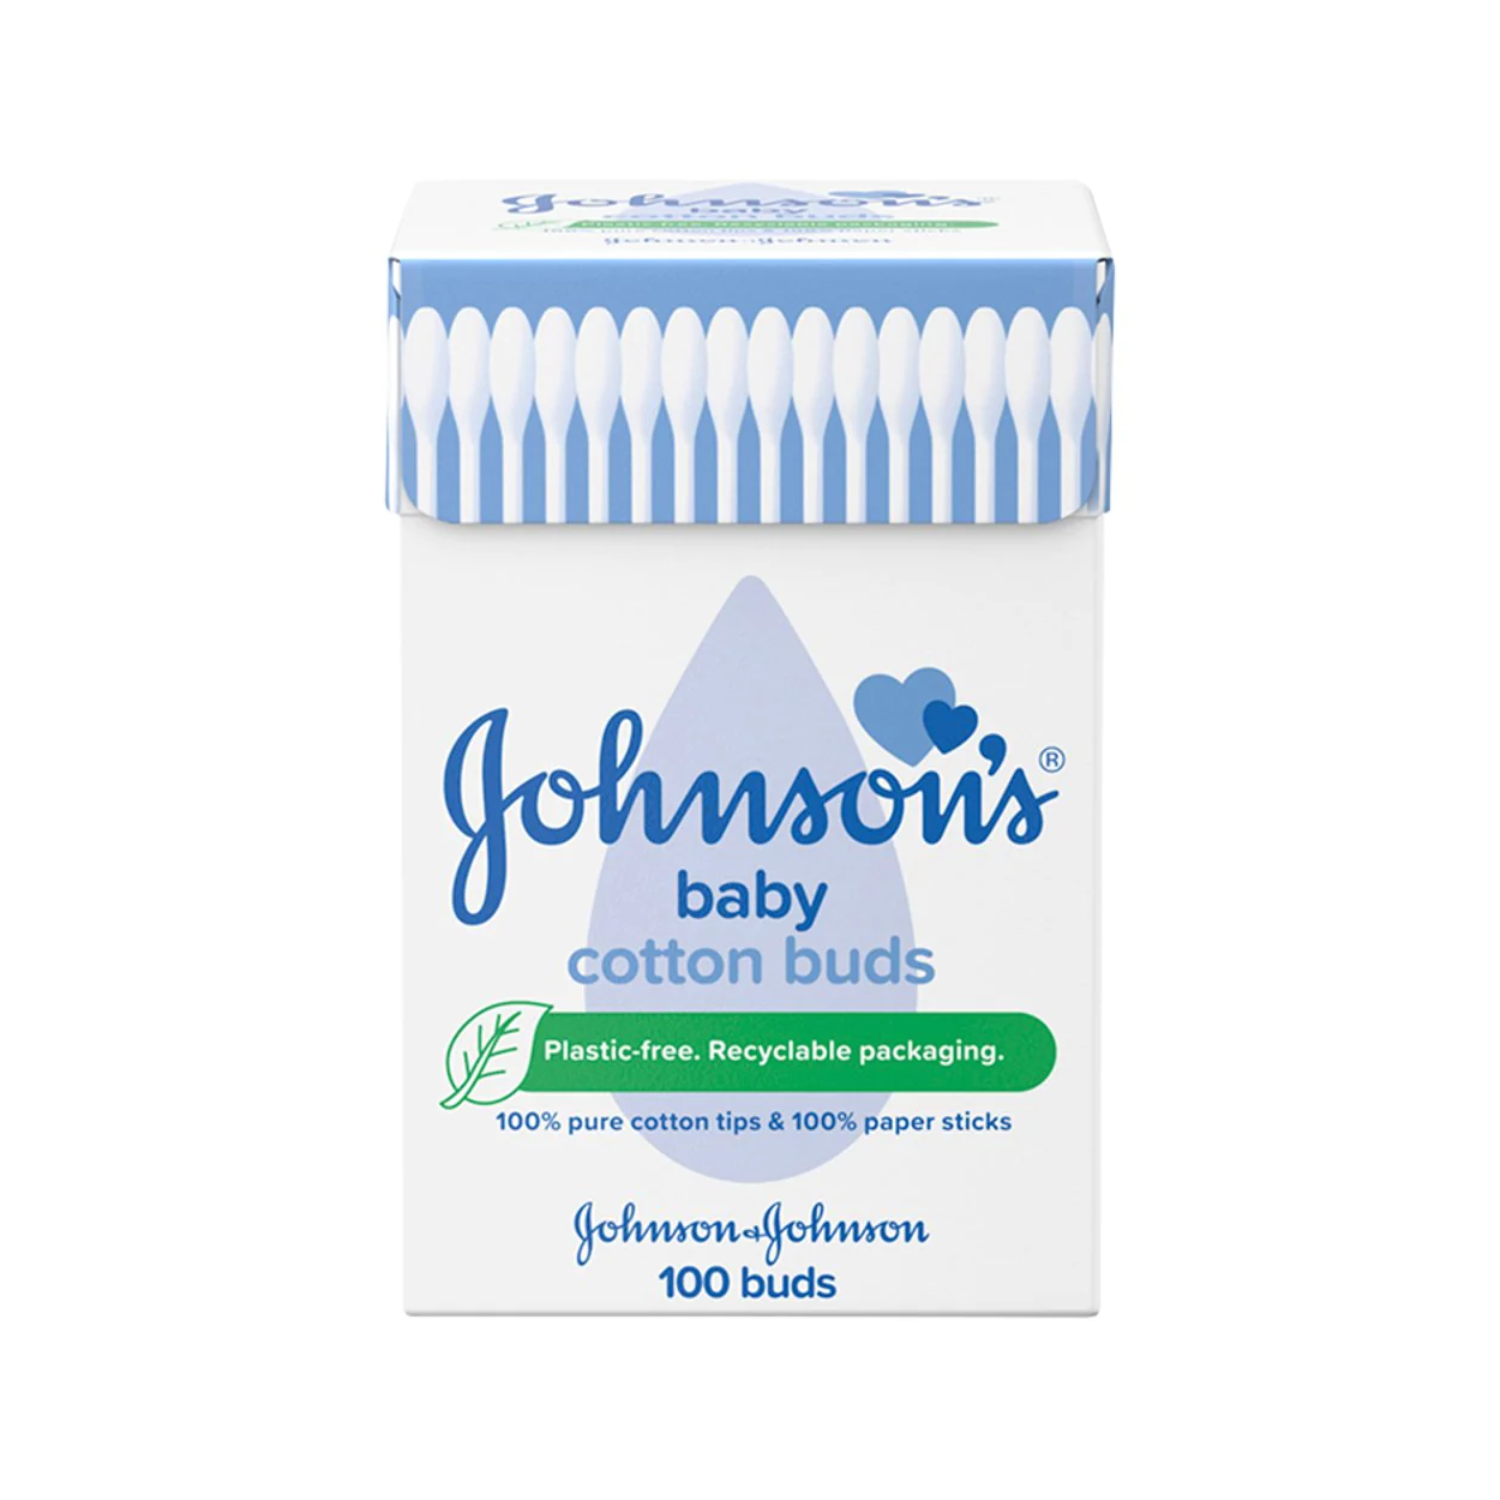 johnsons-baby-cotton-buds-italy-100-buds